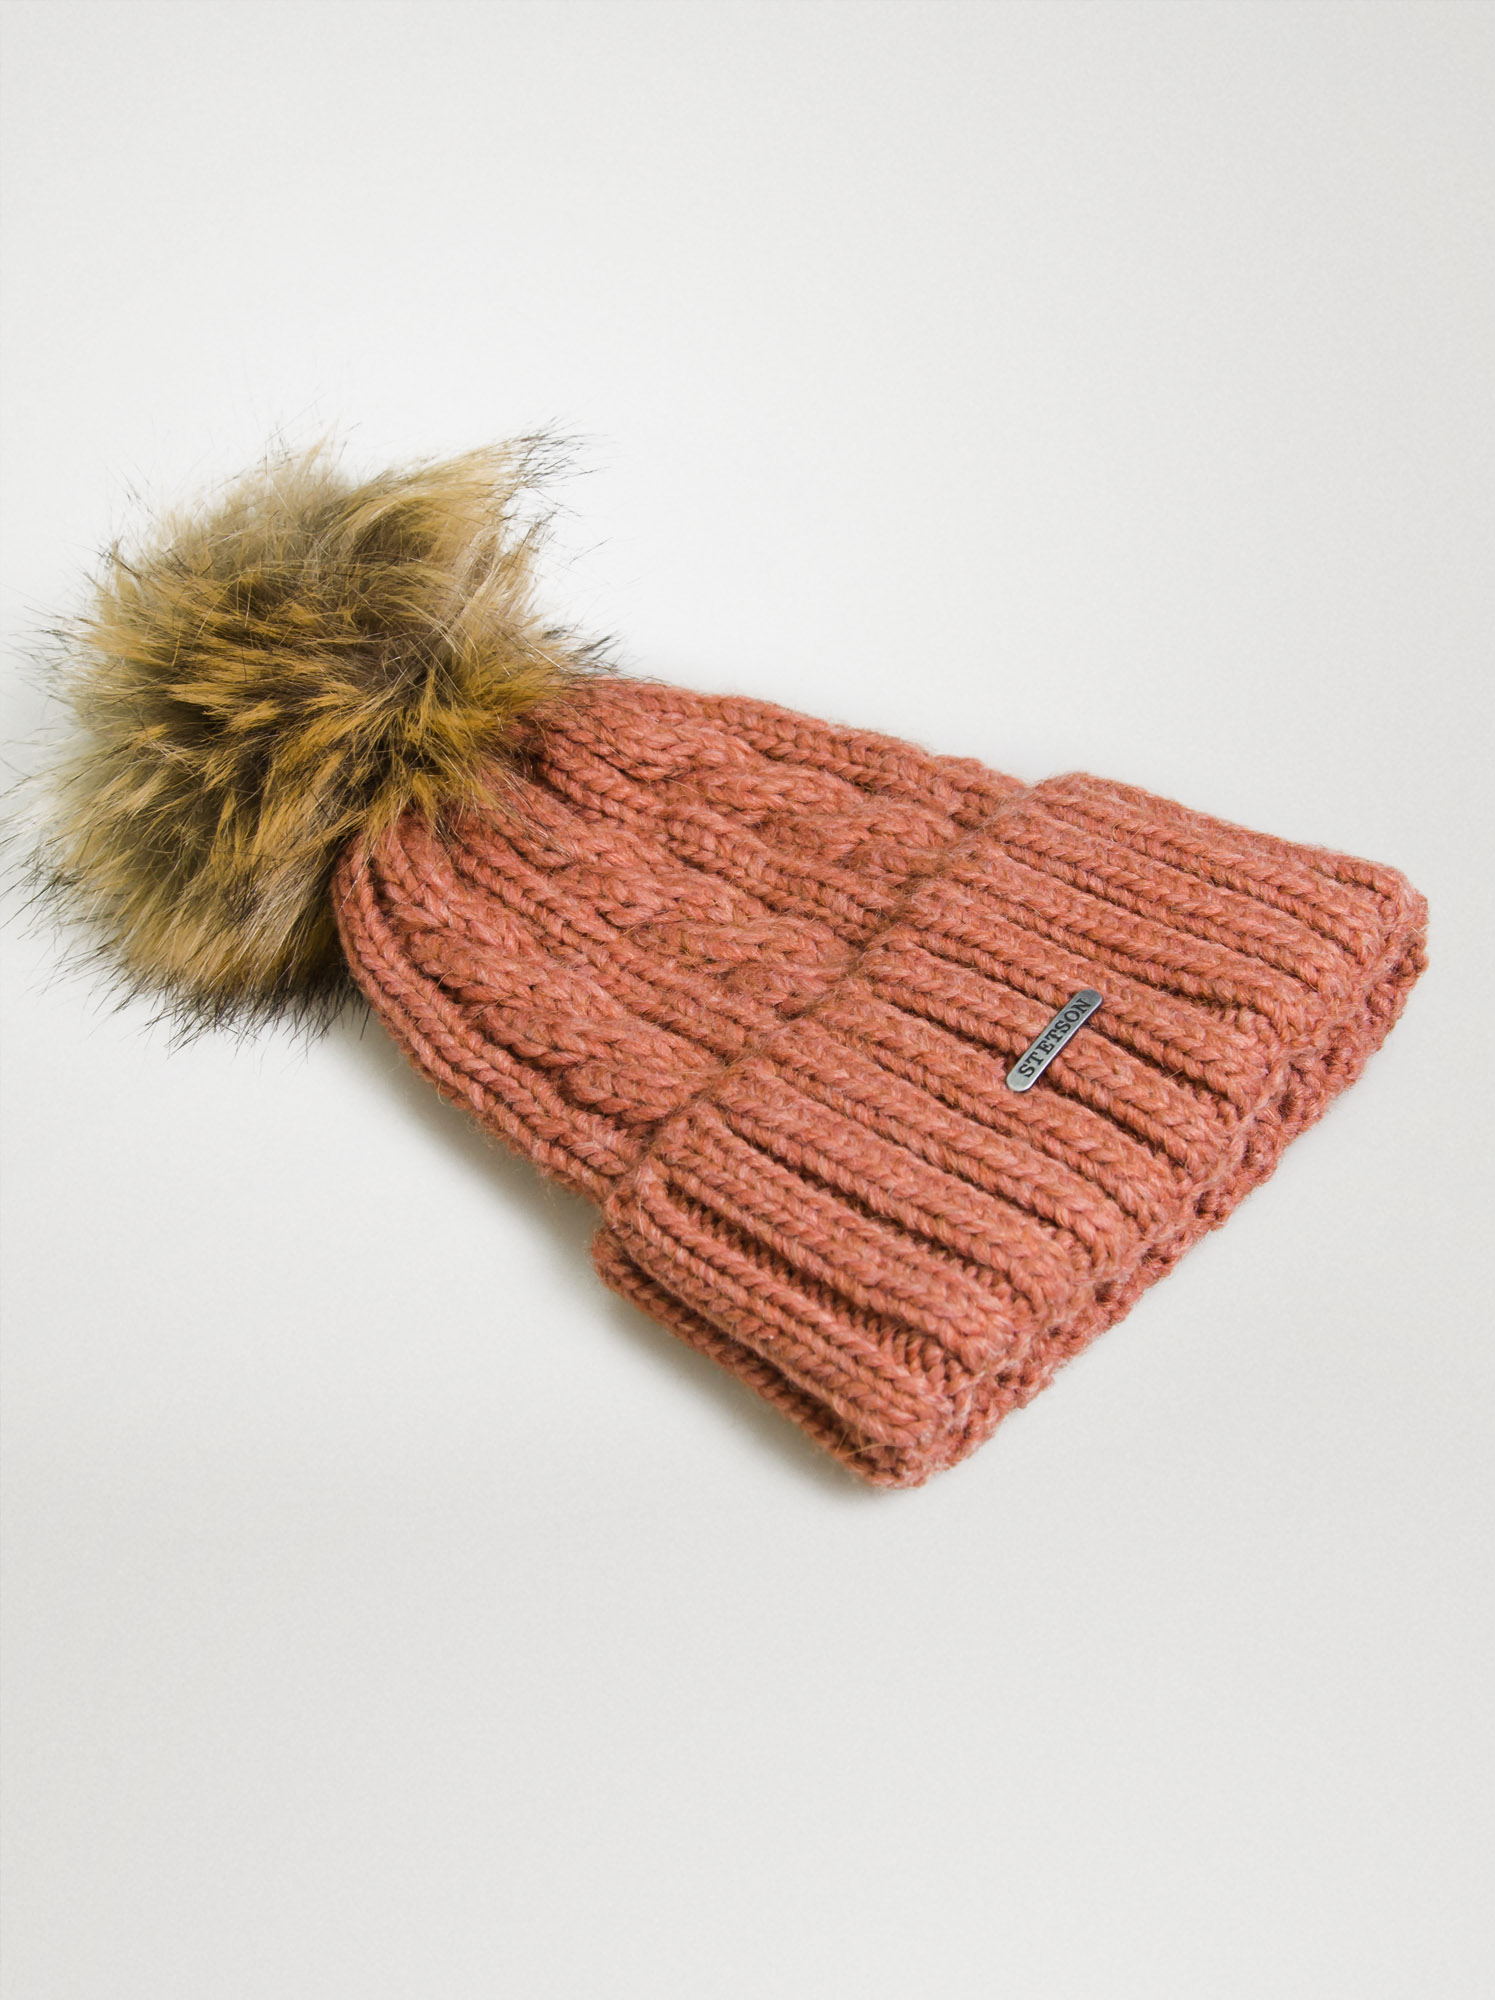 STETSON Beanie Pompom cap with wool - Stetson image 2